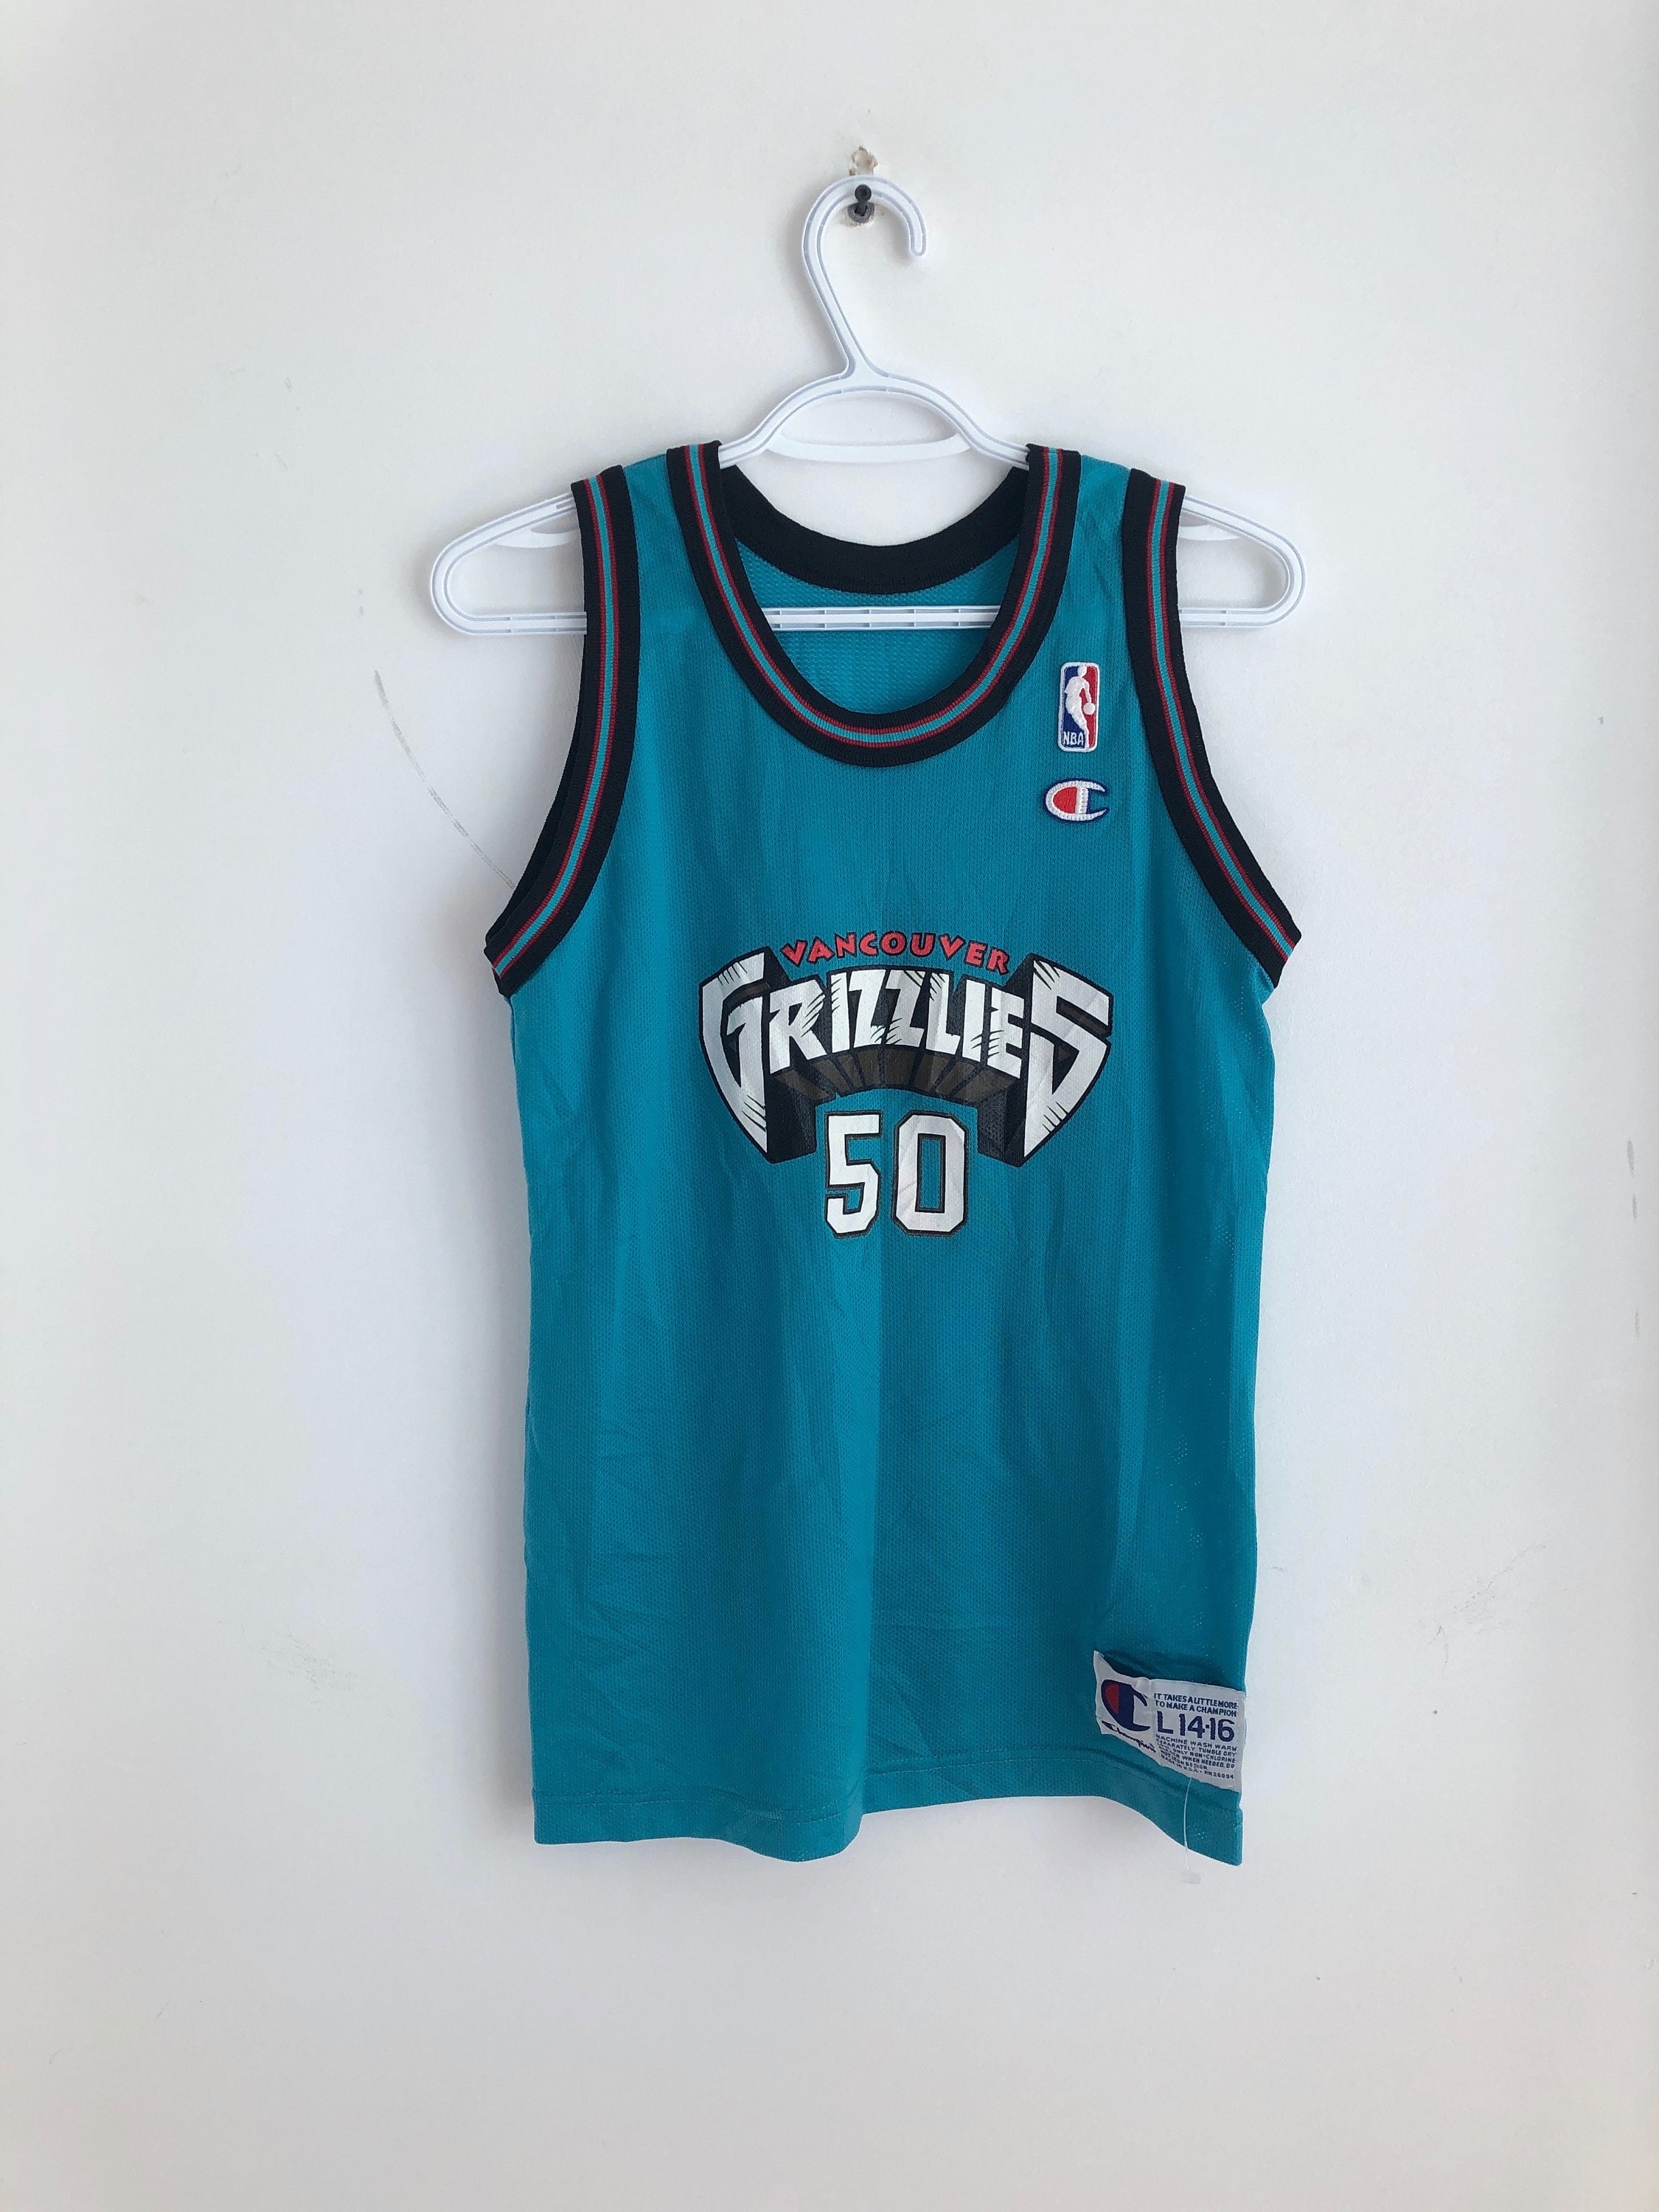 Big Country Bryant Reeves  Best jersey, Best nba jerseys